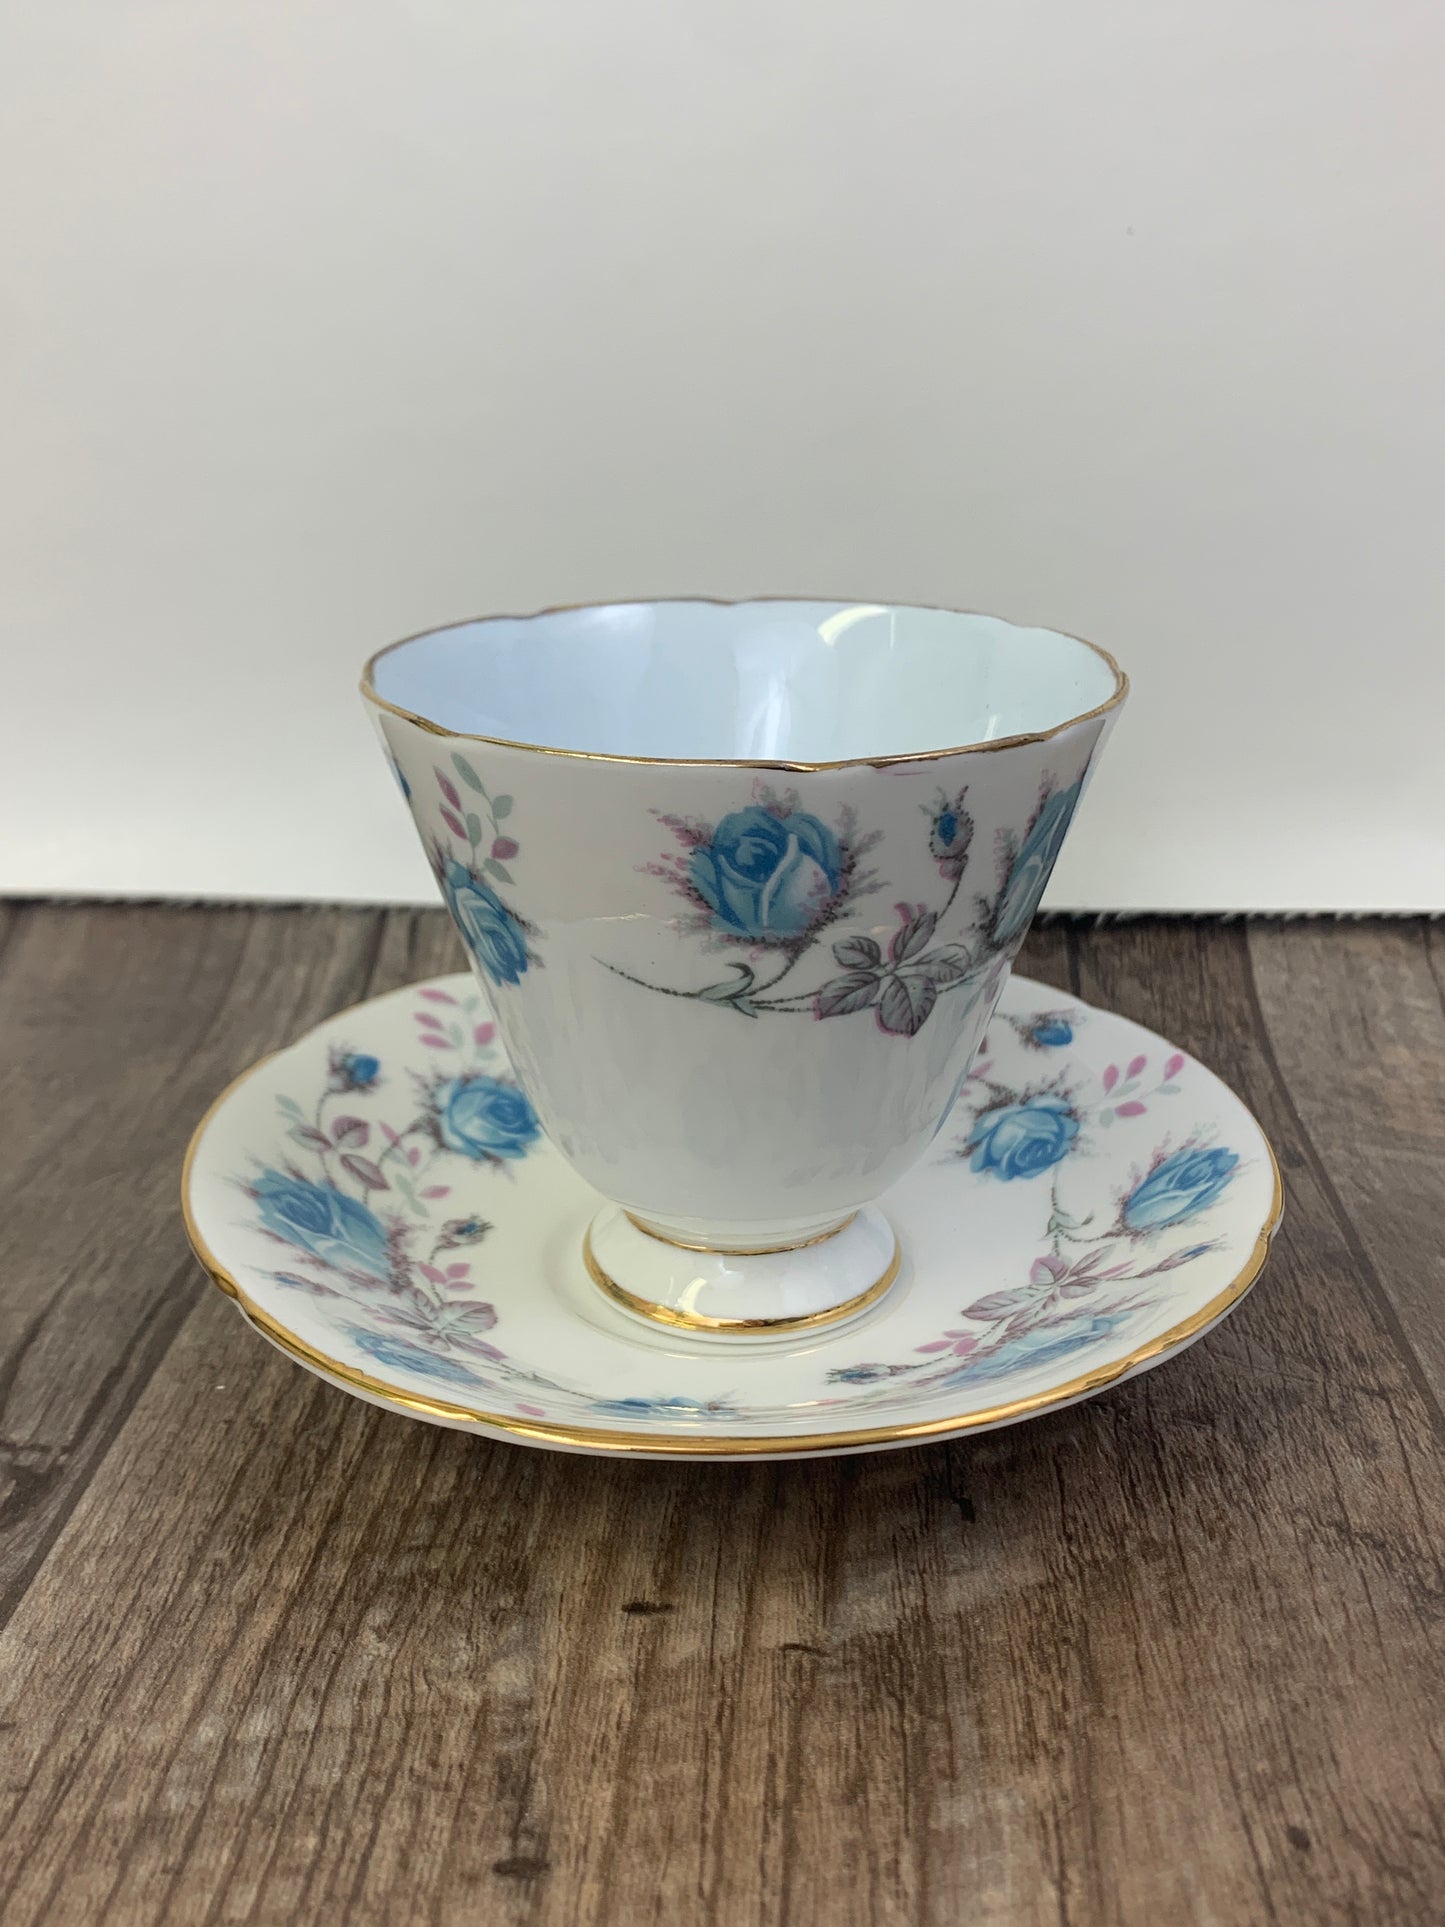 Vintage Teacup with Blue Floral Pattern Blue Inner Cup Mothers Day Gifts Vintage English Tea Cups